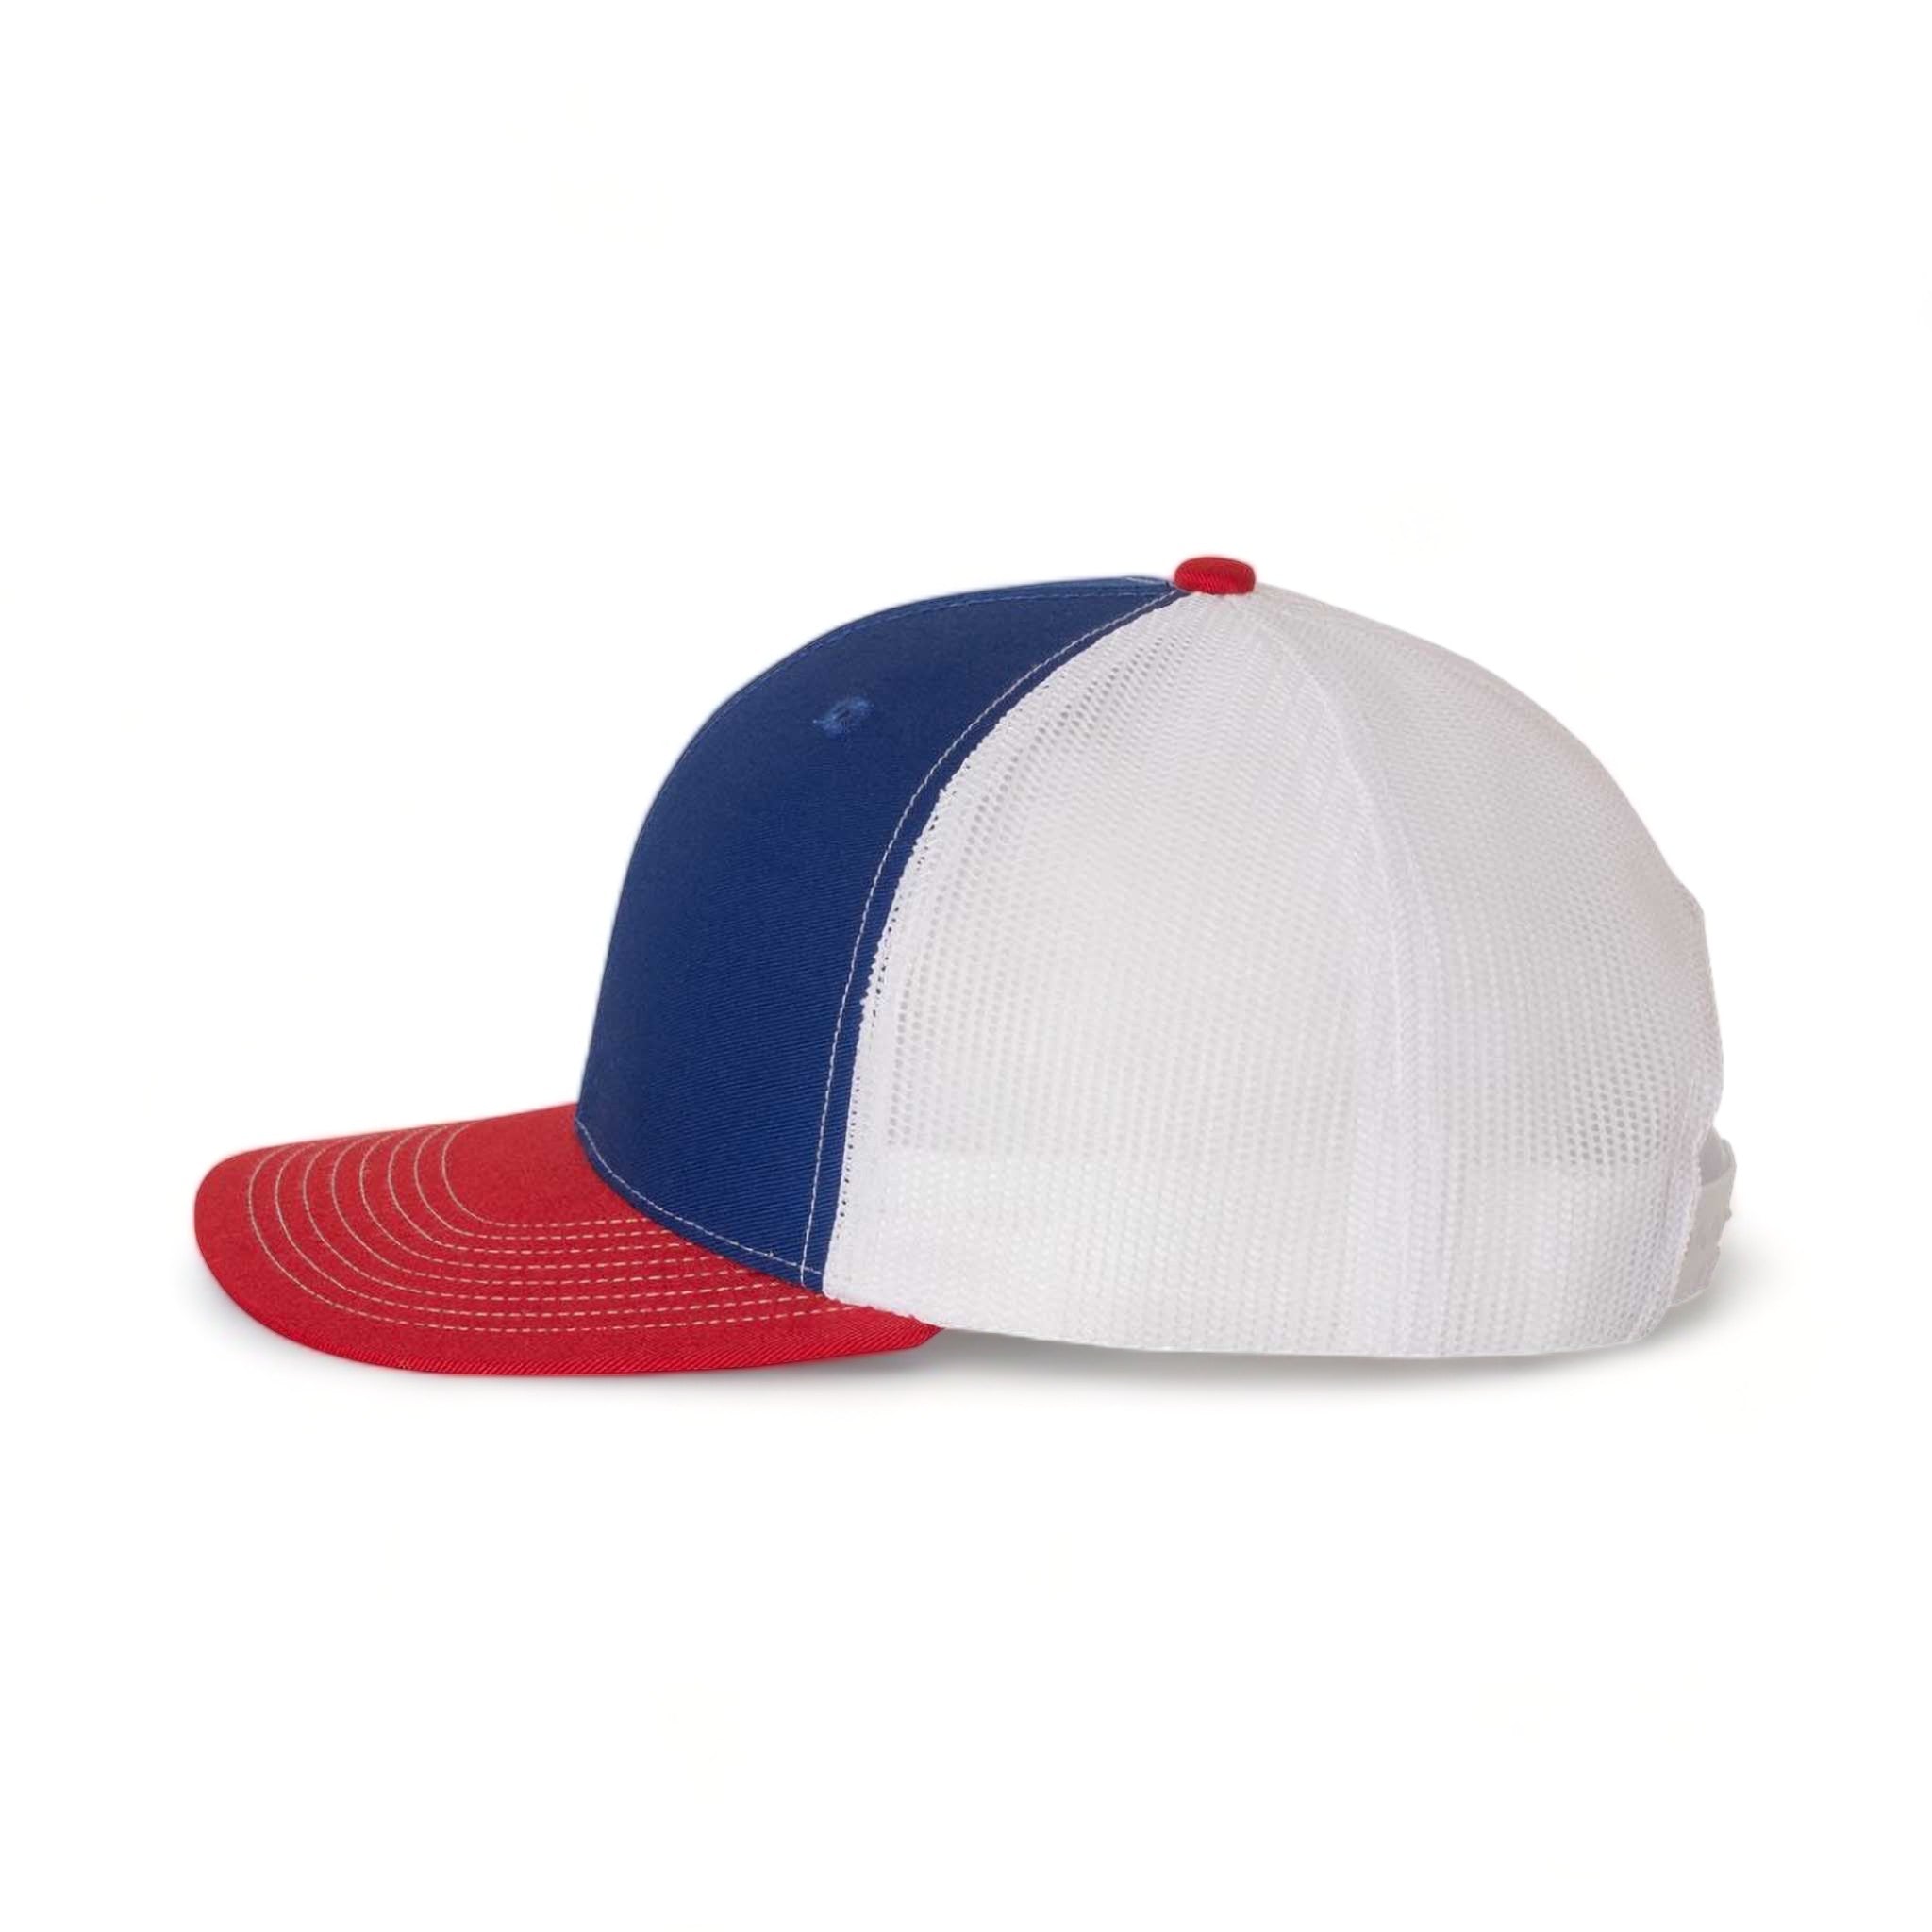 Side view of Richardson 112 custom hat in royal, white and red